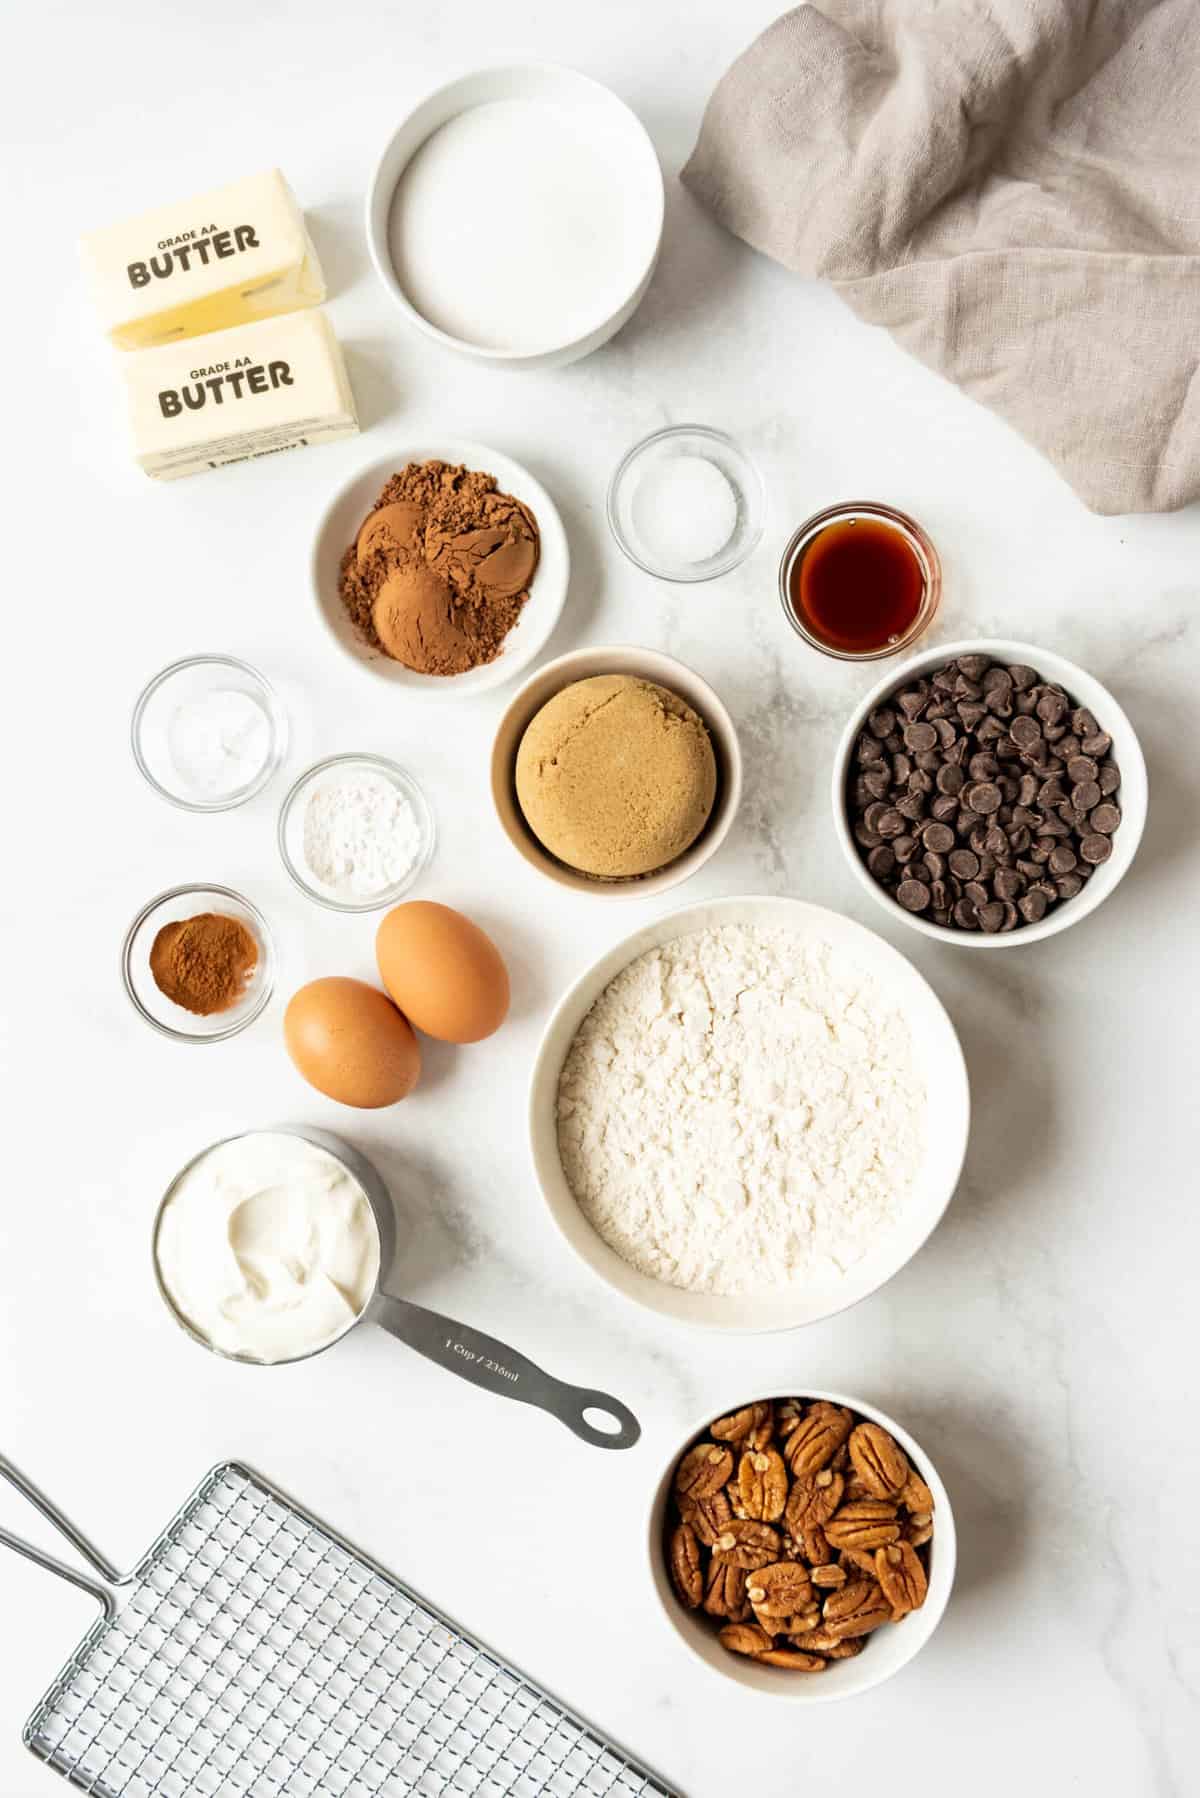 Ingredients for chocolate pecan crumb cake in separate bowls.